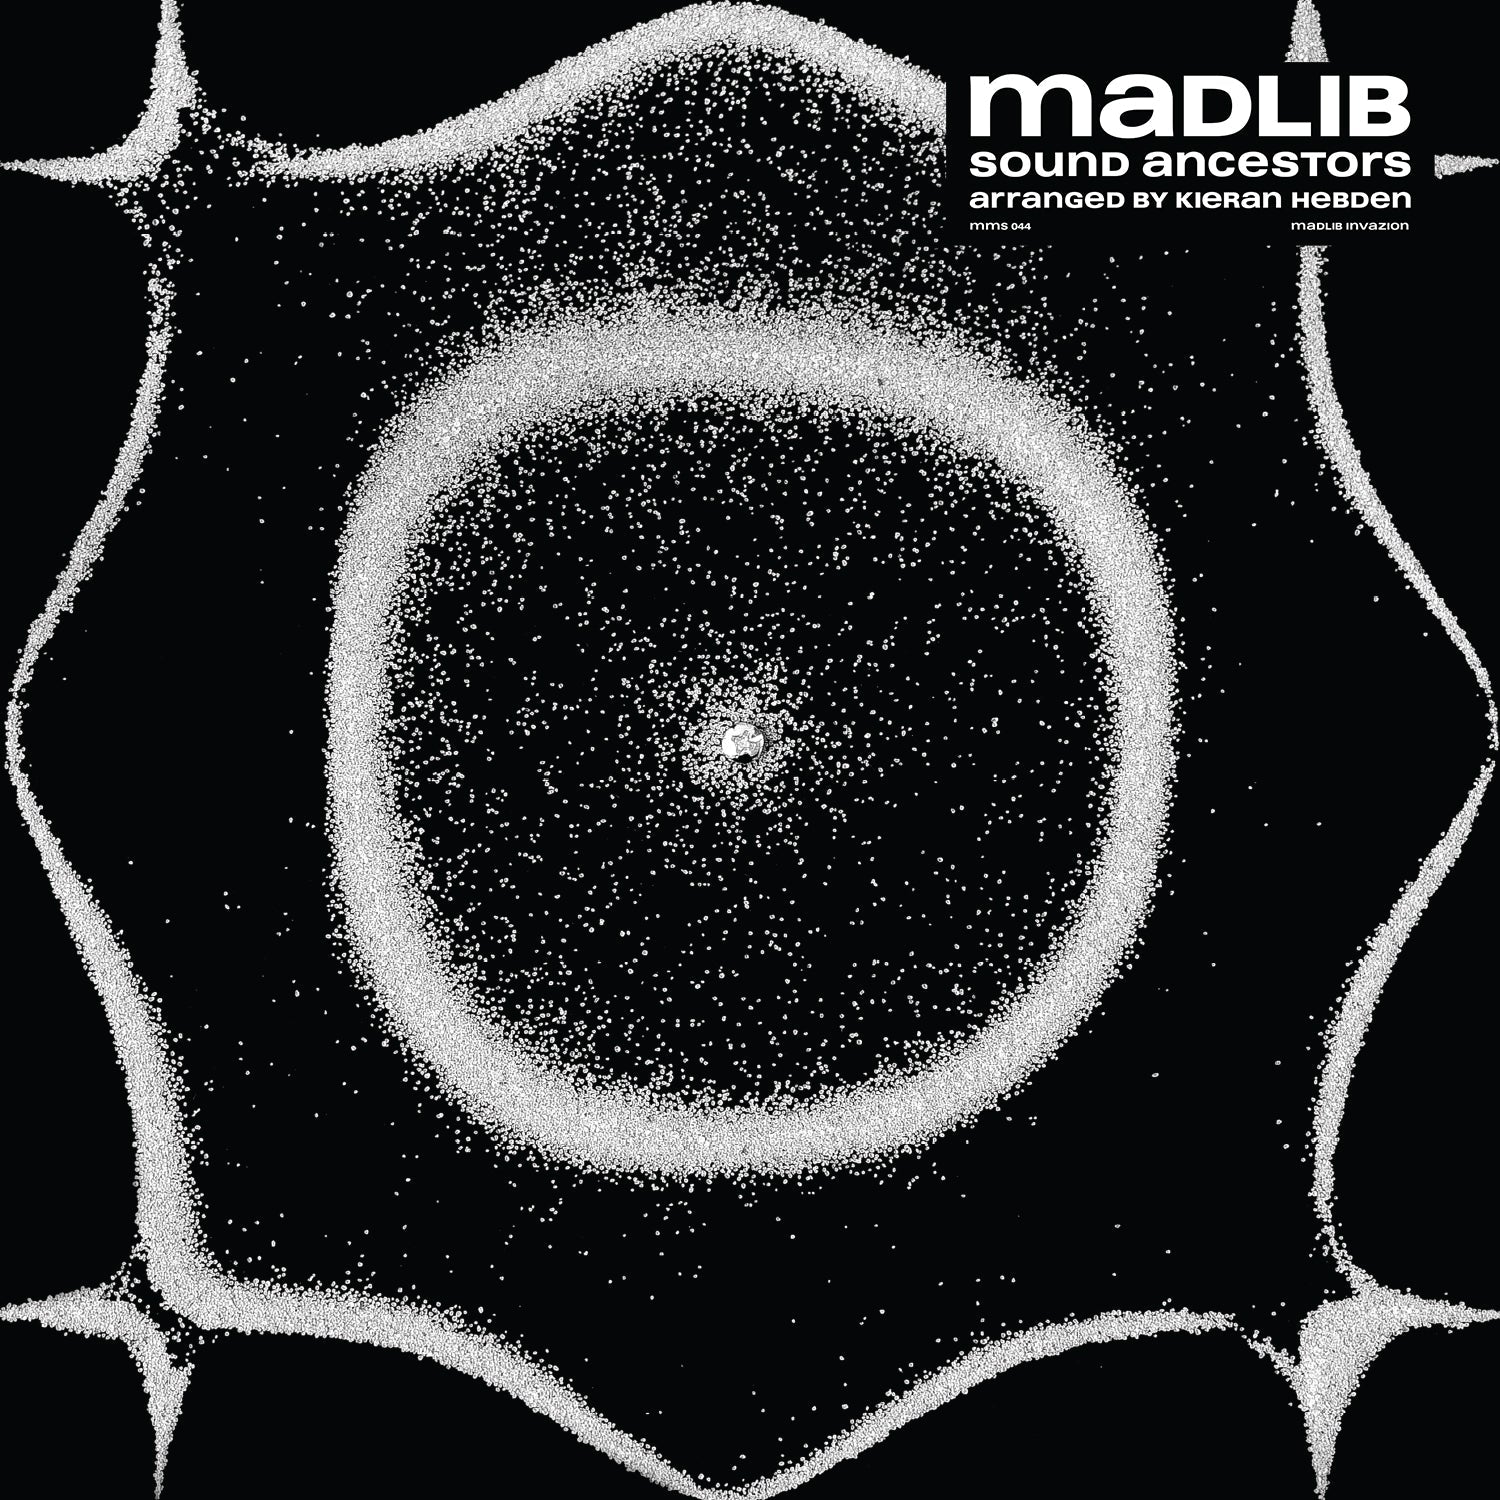 Madlib - Shades of Blue (Classic Vinyl Series) - Blue Note Records